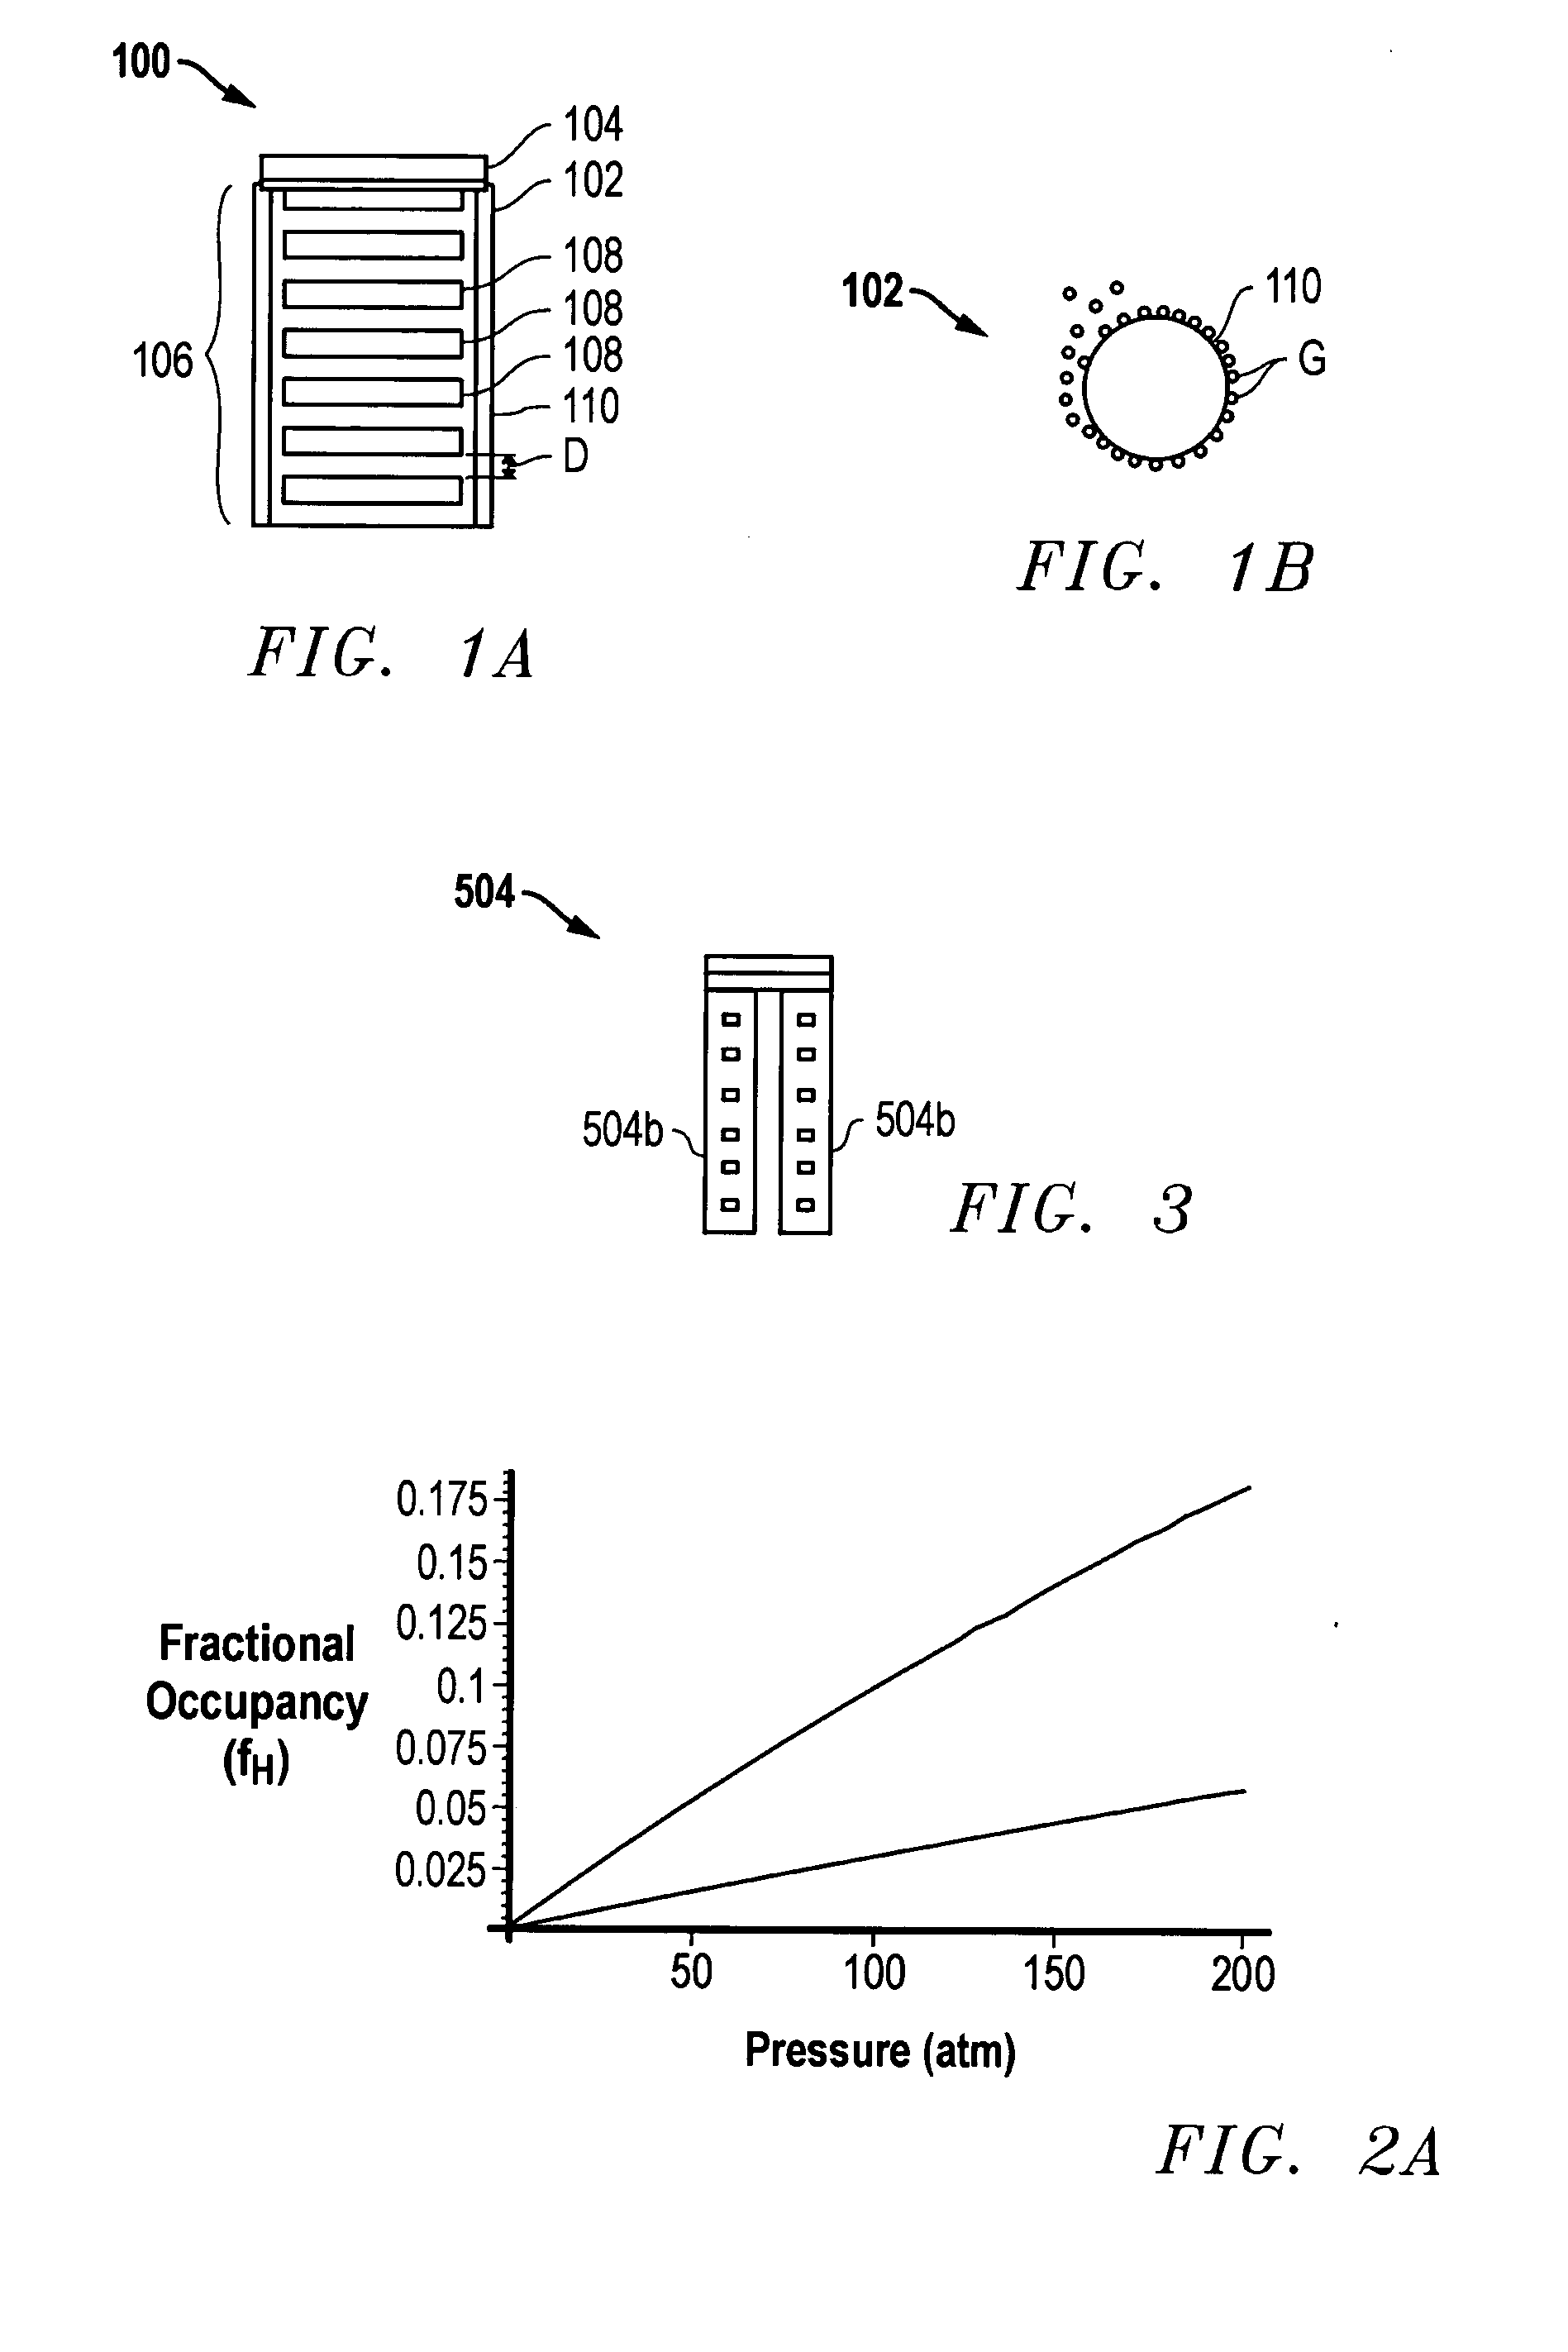 Storage device and method for sorption and desorption of molecular gas contained by storage sites of nano-filament laded reticulated aerogel